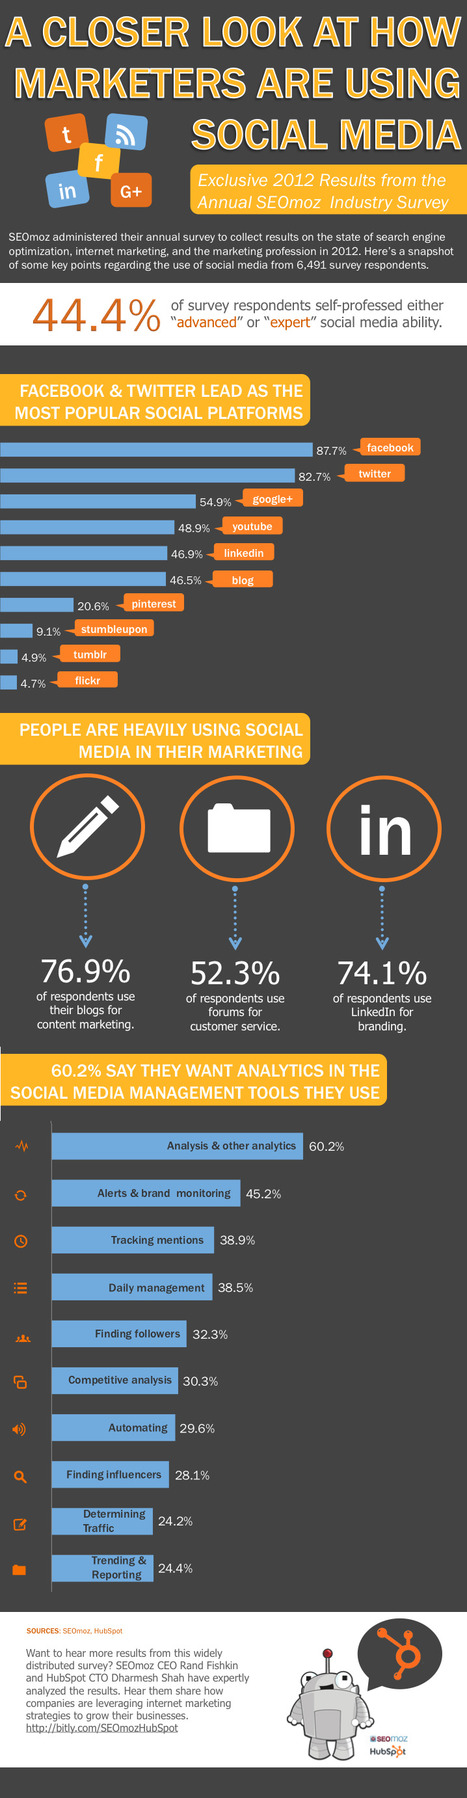 New Data Reveals How Marketers Use Social Media [INFOGRAPHIC] | MarketingHits | Scoop.it